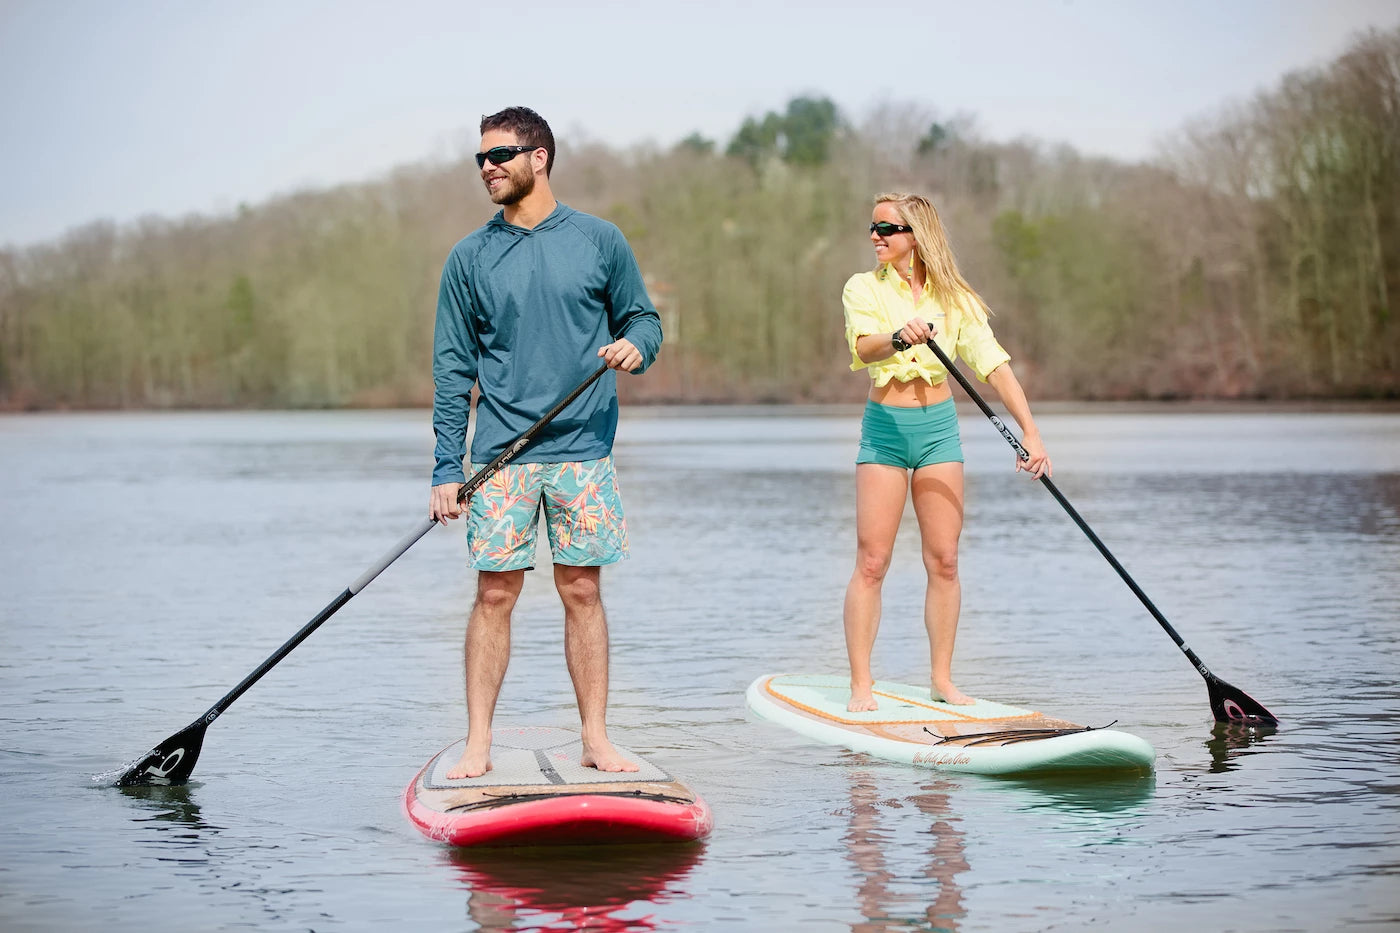 Click Here for More Info - Cruiser SUP Wahine Classic Purple 9'6, 10'2 &  10'8 Ultra-Lite Bamboo Stand Up Pad…